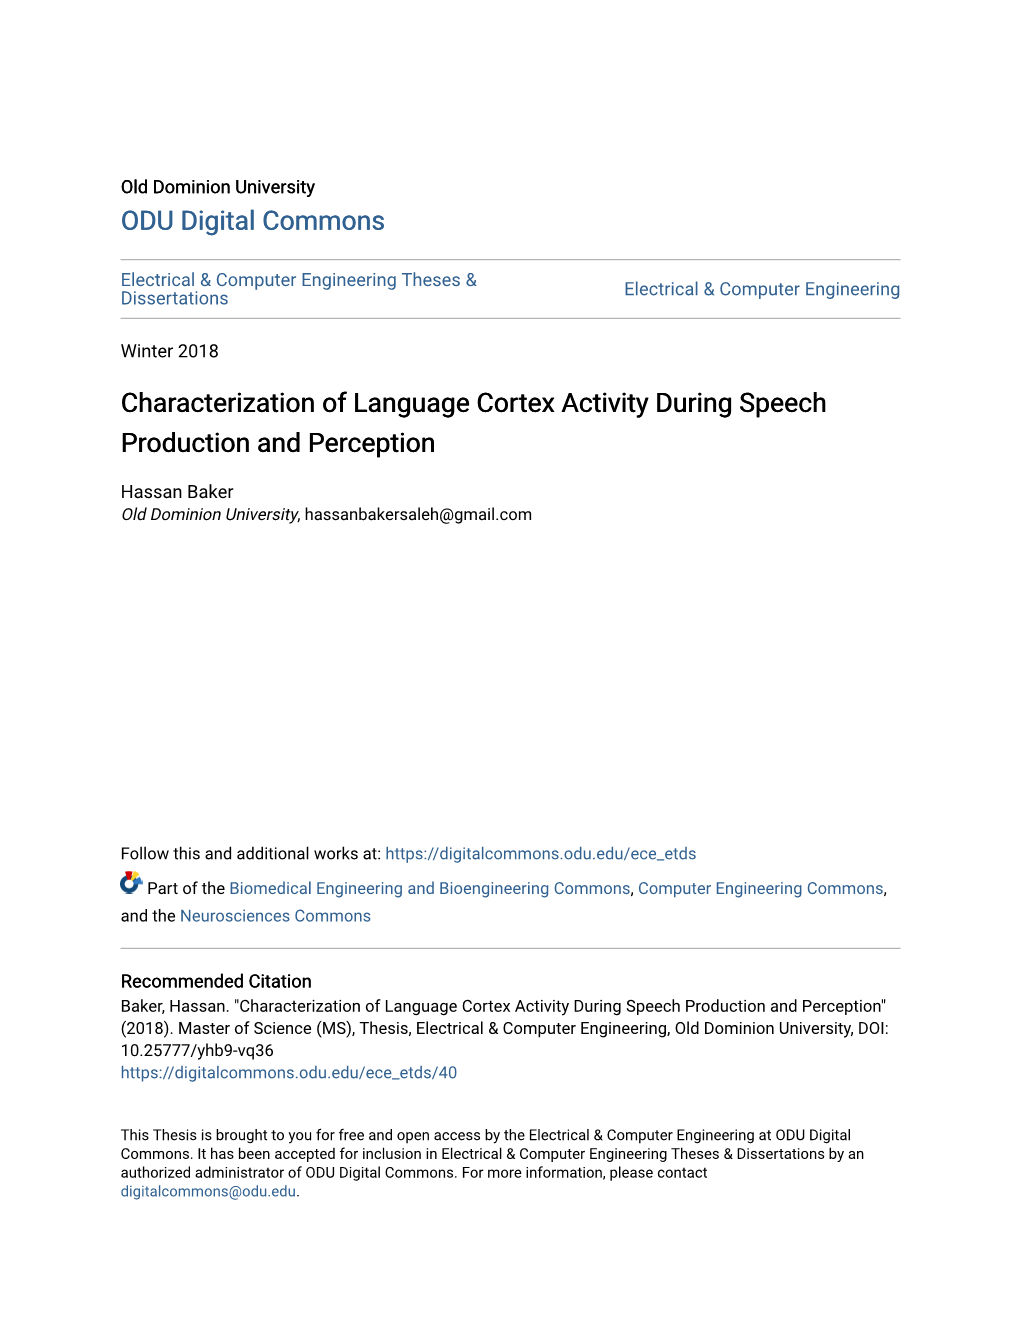 Characterization of Language Cortex Activity During Speech Production and Perception